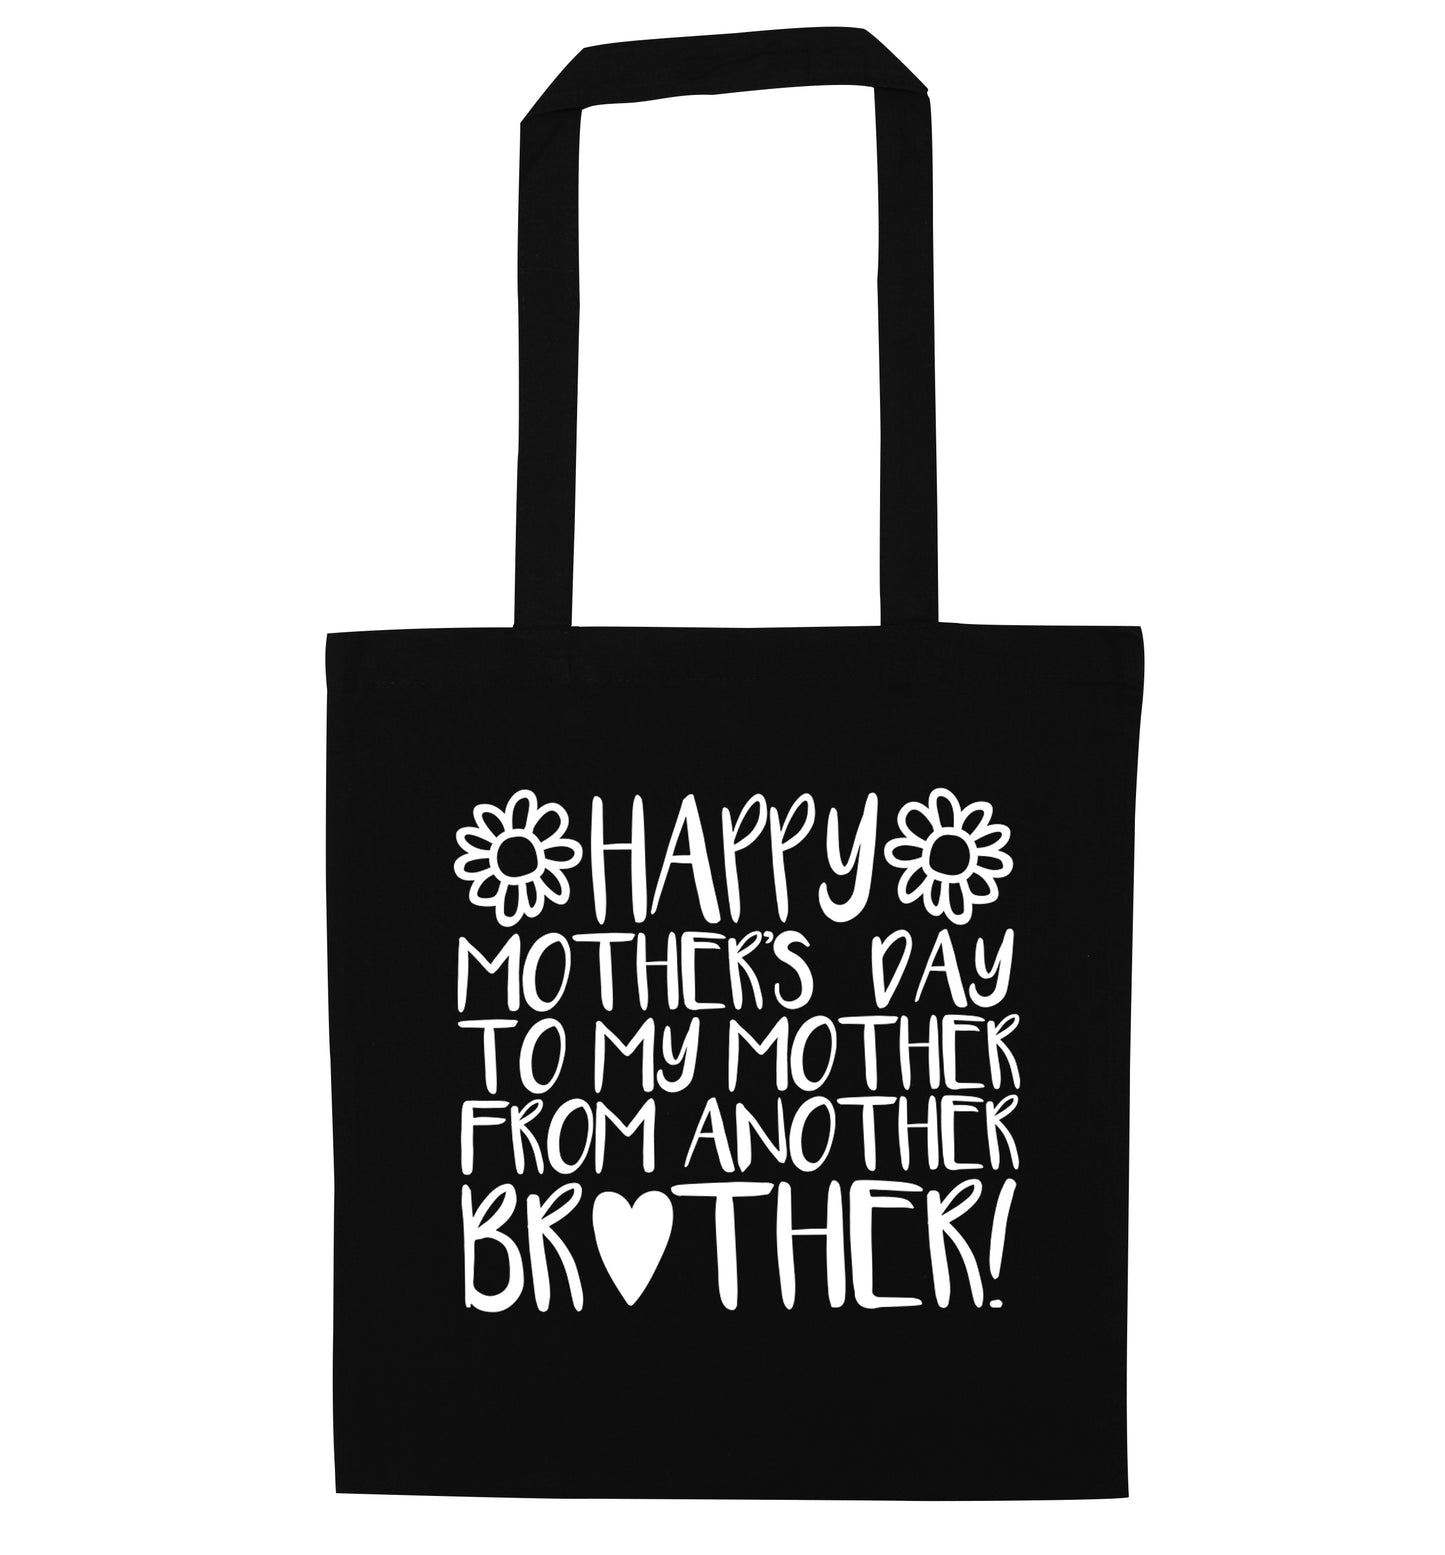 Happy mother's day to my mother from another brother black tote bag